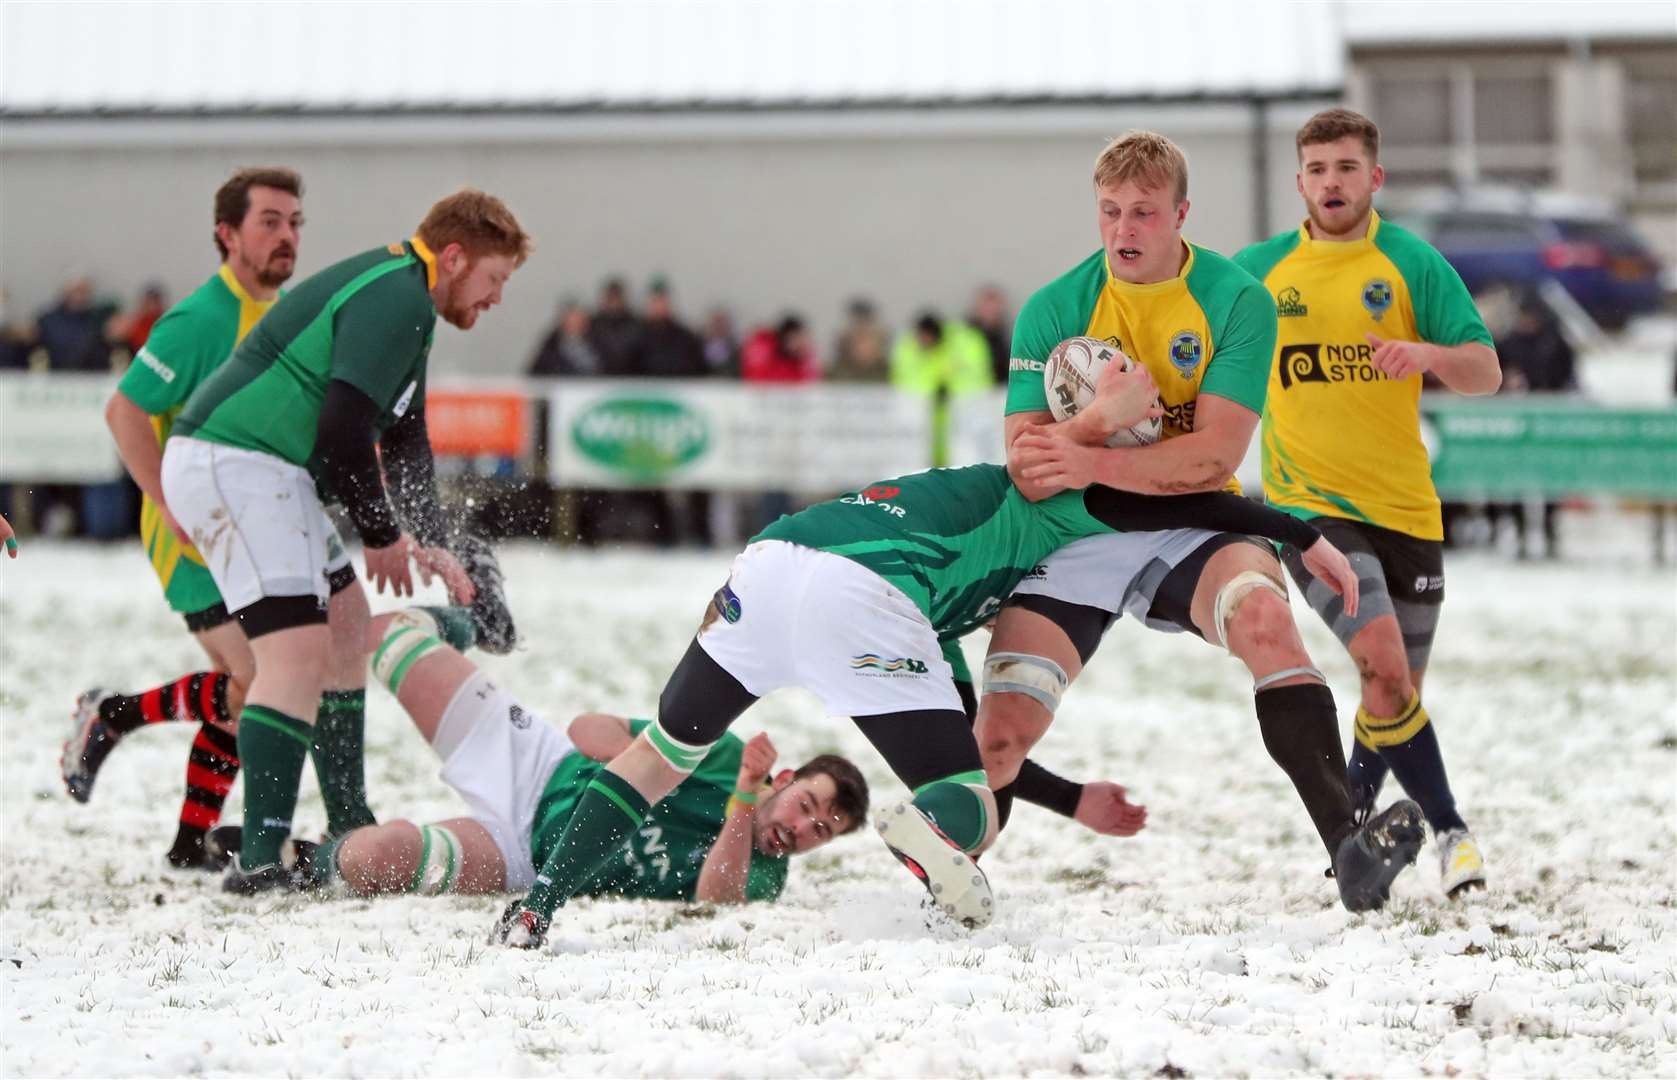 The Exiles/Students romped to a 41-8 victory at a snowy Millbank in last year's festive fixture. Picture: James Gunn